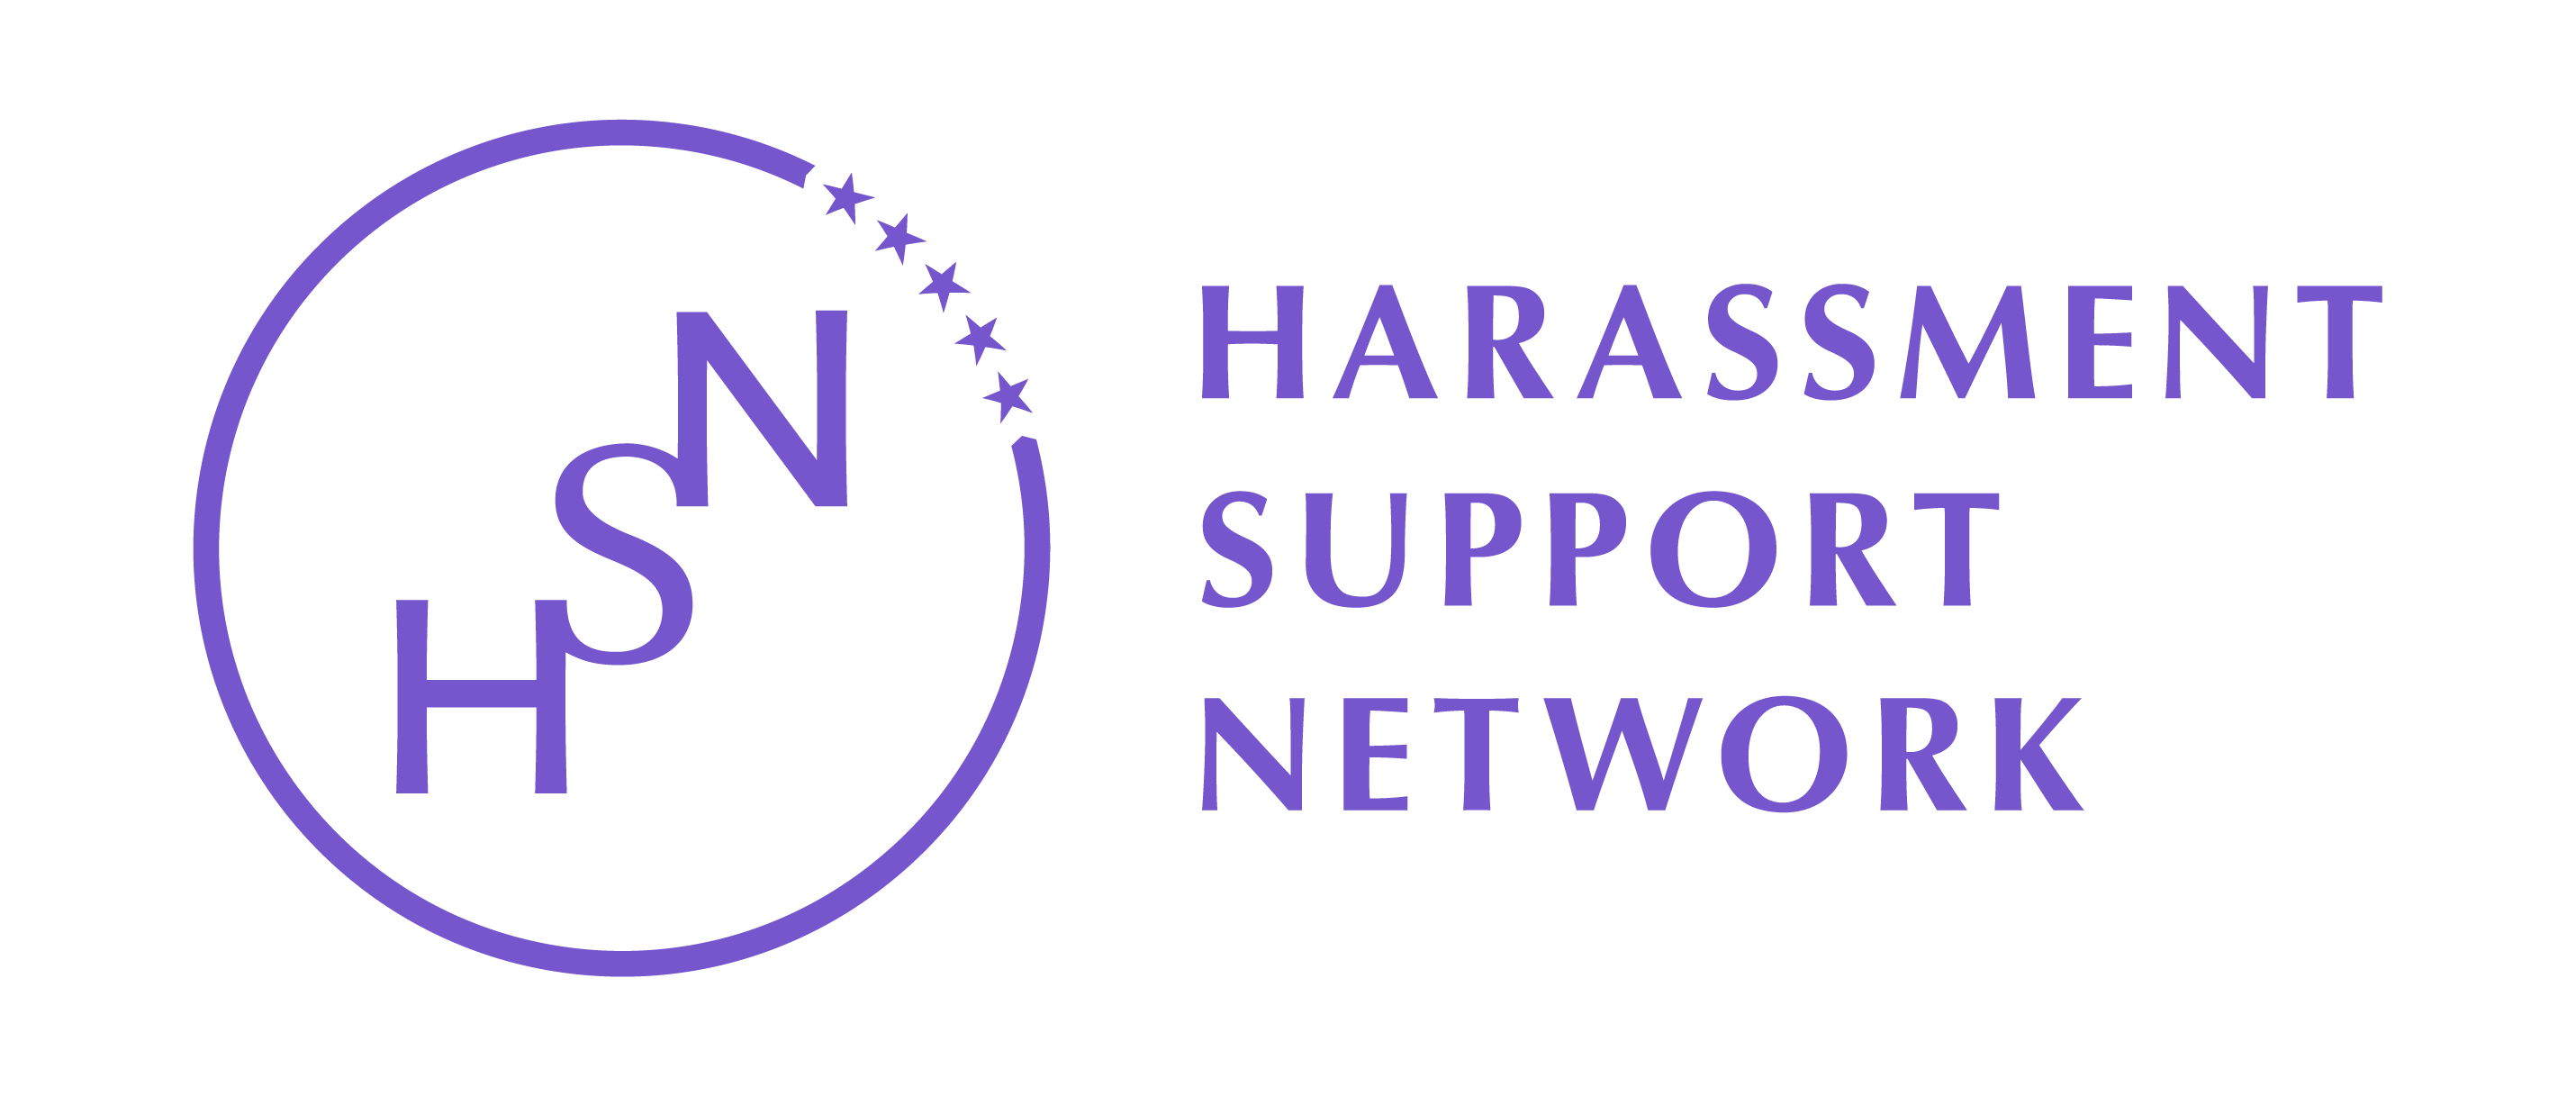 Harassment Support Network